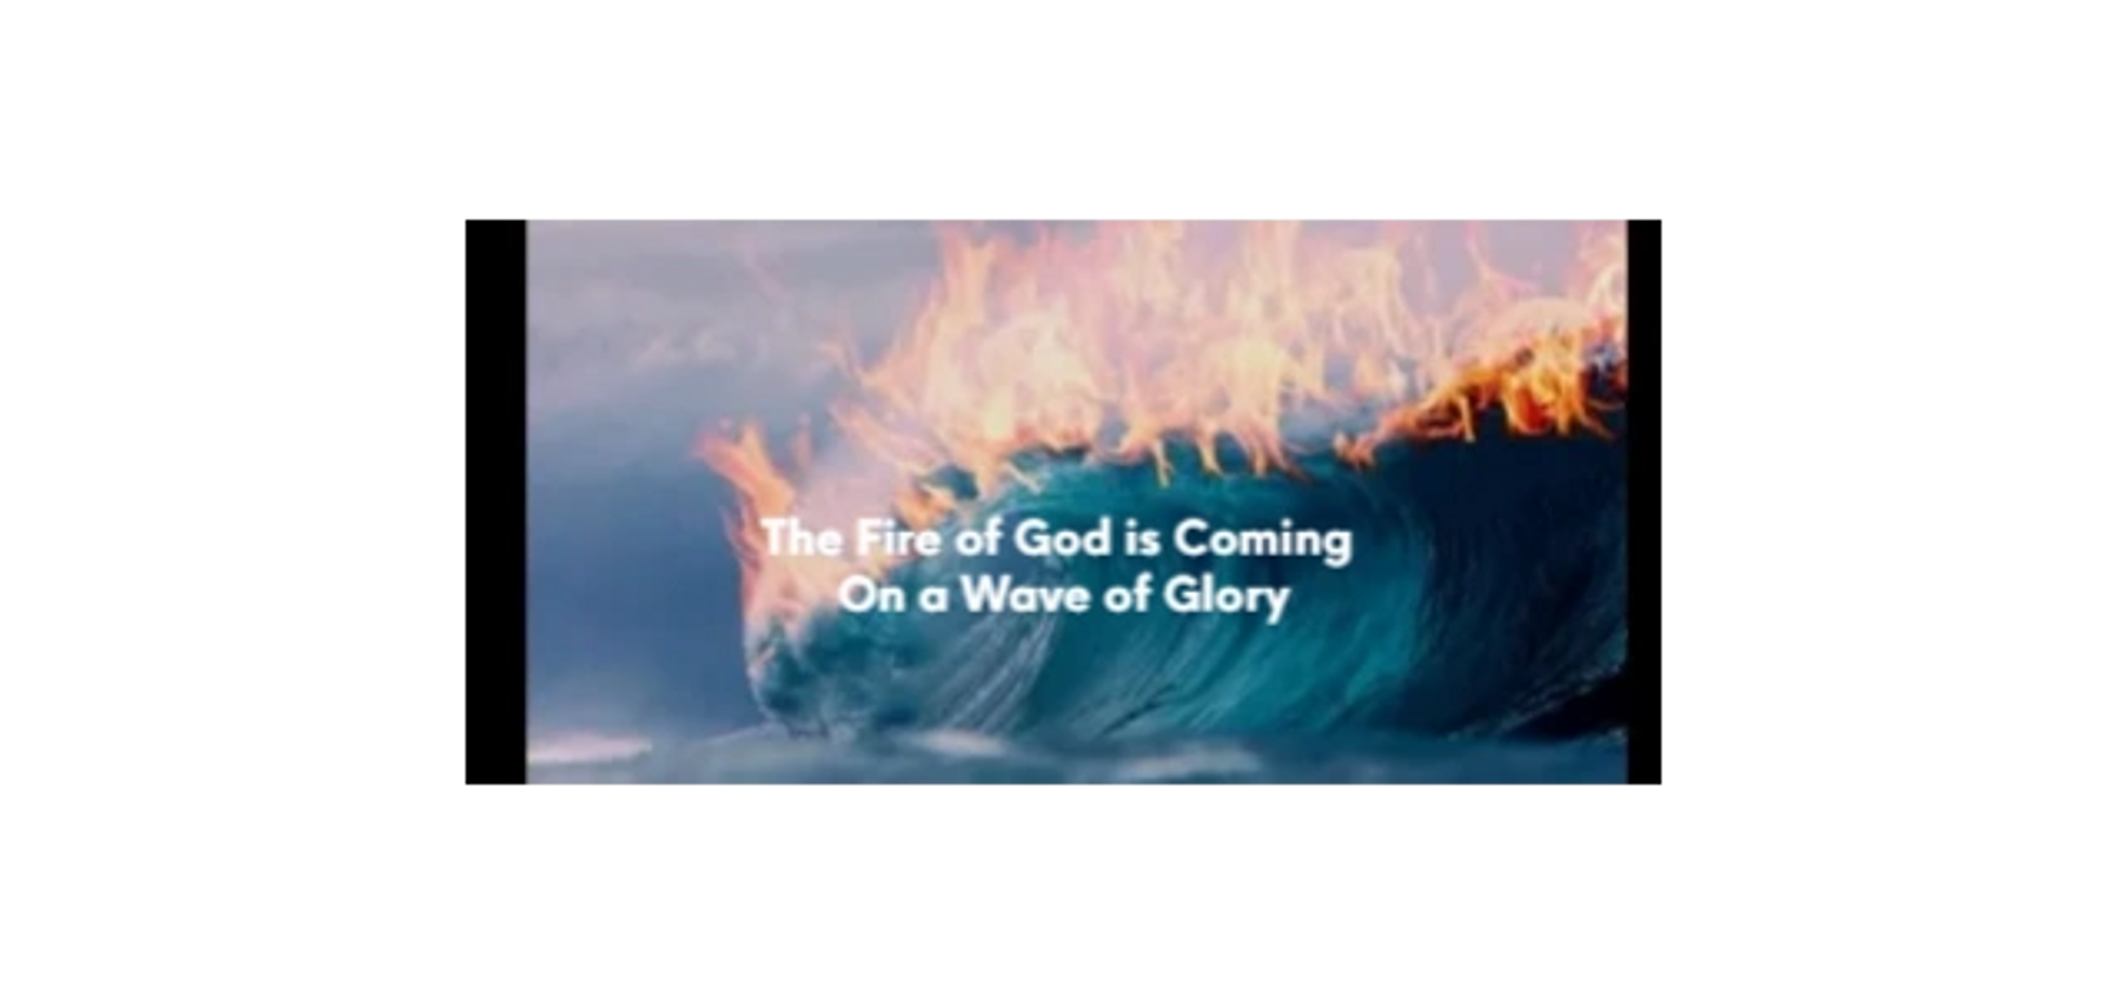 The Fire of God is Coming
On a Wave of Glory